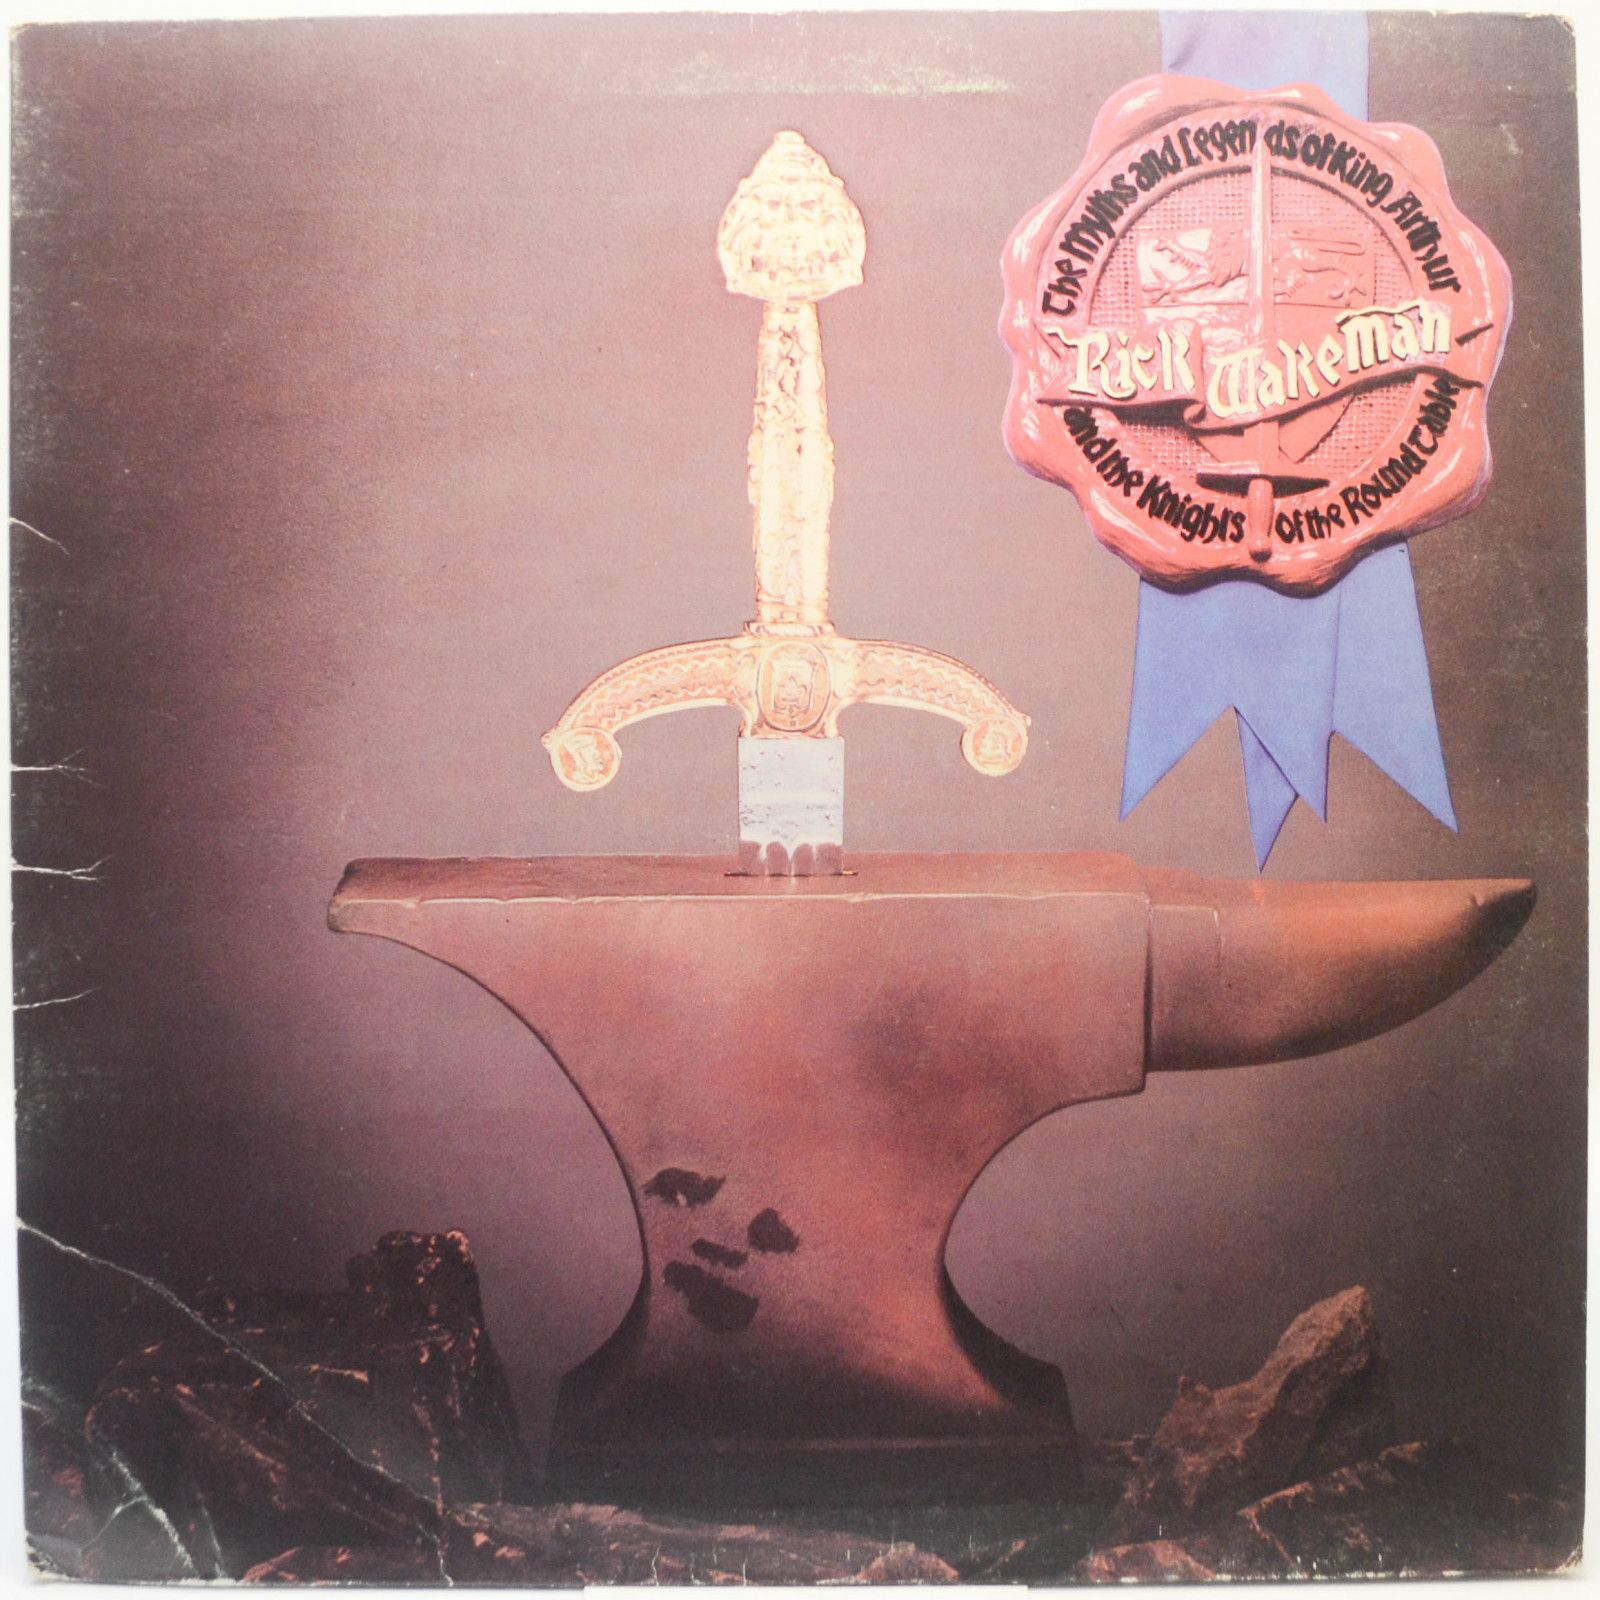 Rick Wakeman — The Myths And Legends Of King Arthur And The Knights Of The Round Table (1-st, UK), 1975